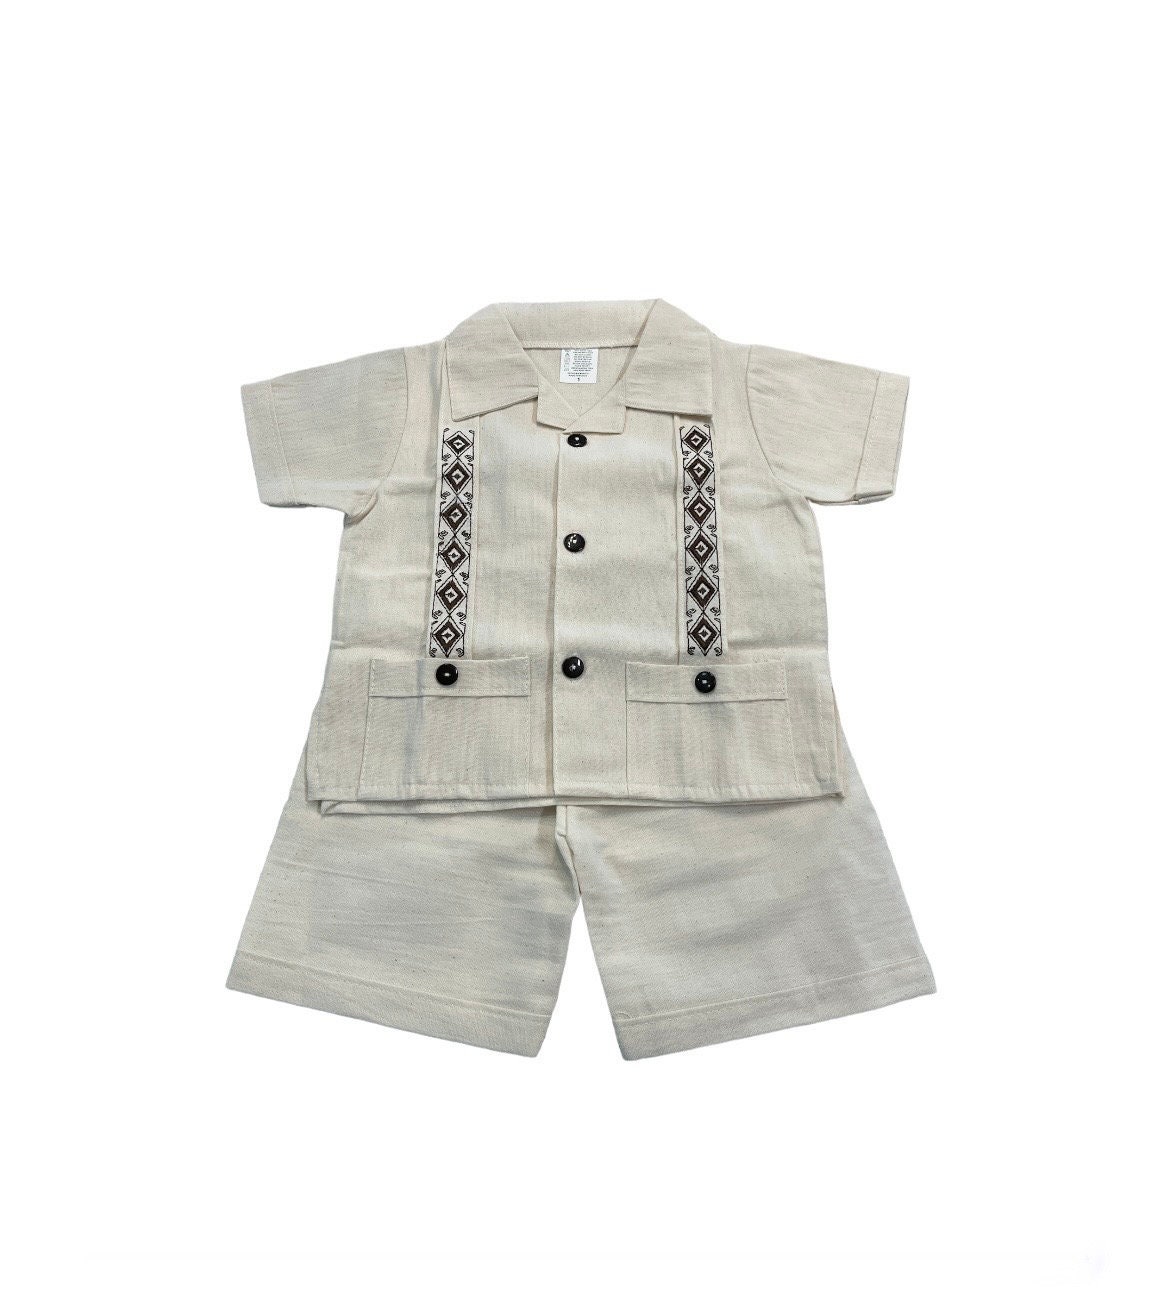 Mexican Baby Toddler Boy Guayabera Outfit Beige Shirt - Etsy Israel